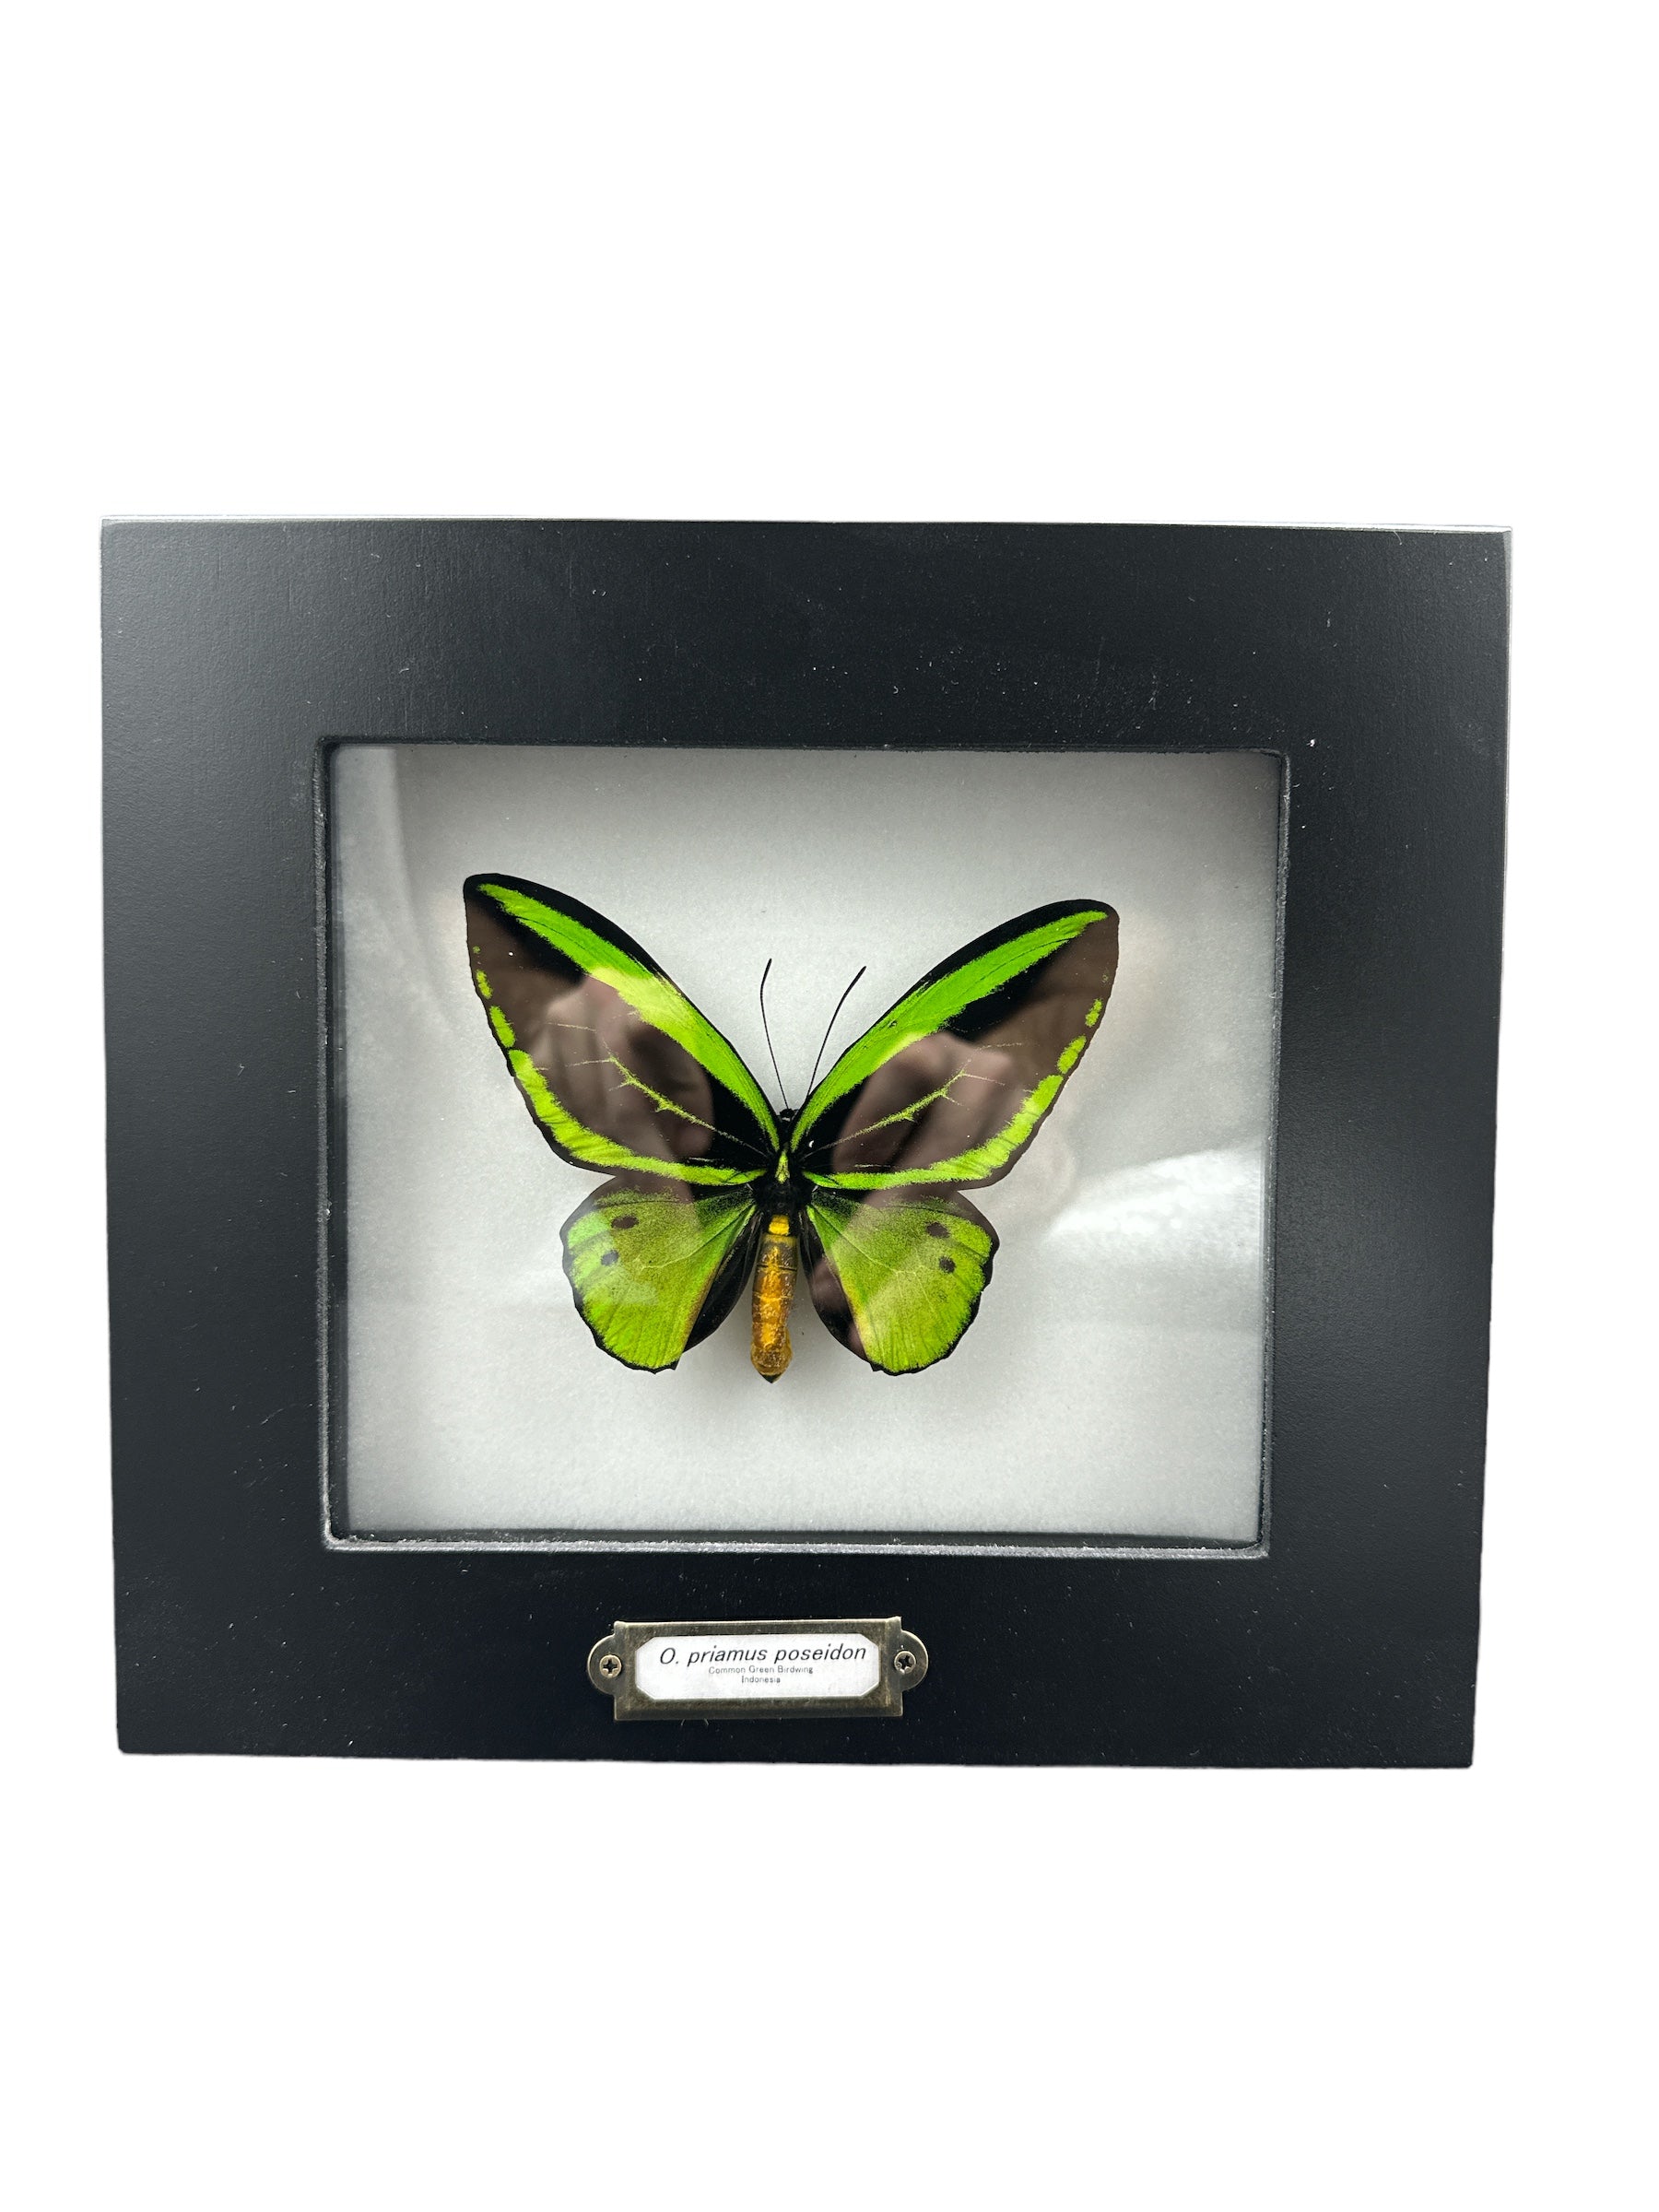 Glosswing Swallowtail Butterfly (Papilio pericles) - 4x5" Frame